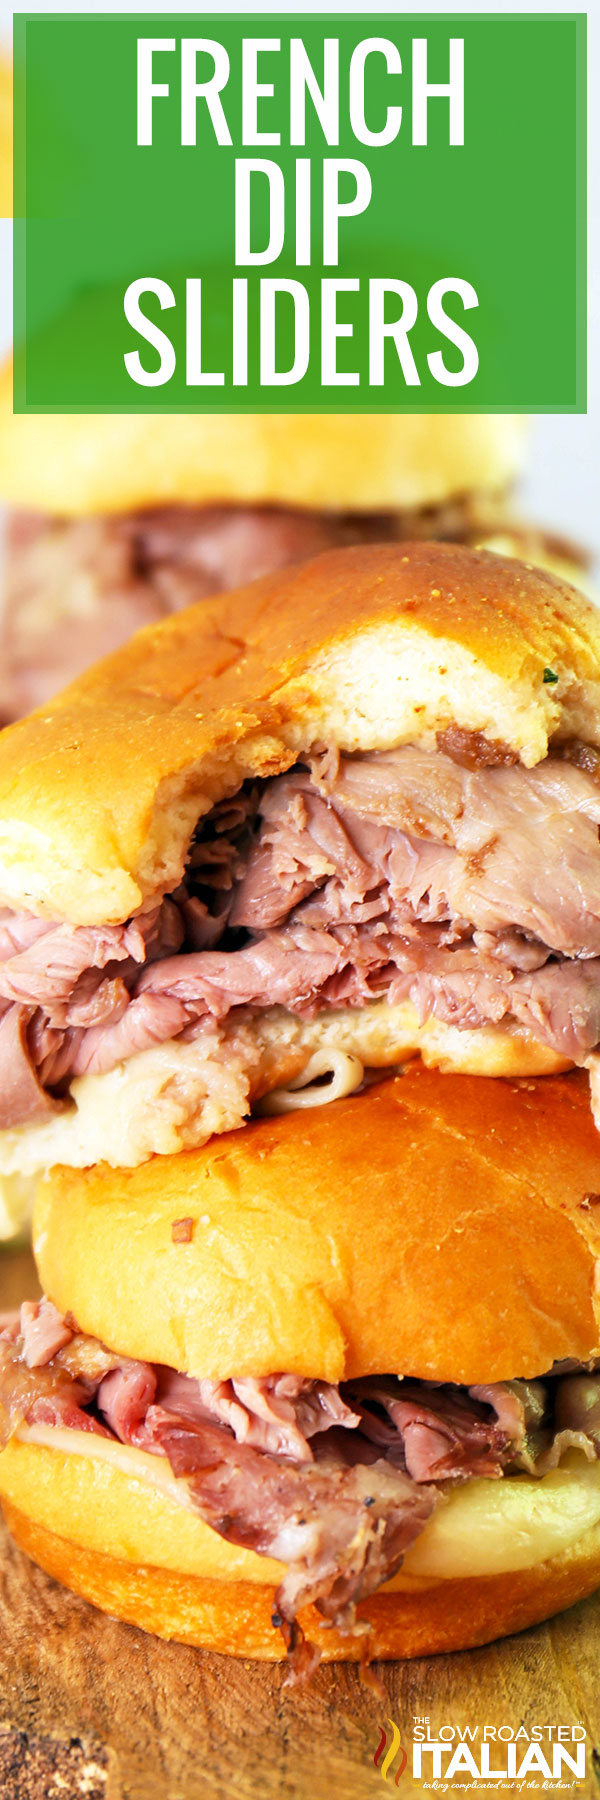 French Dip Sliders -PIN